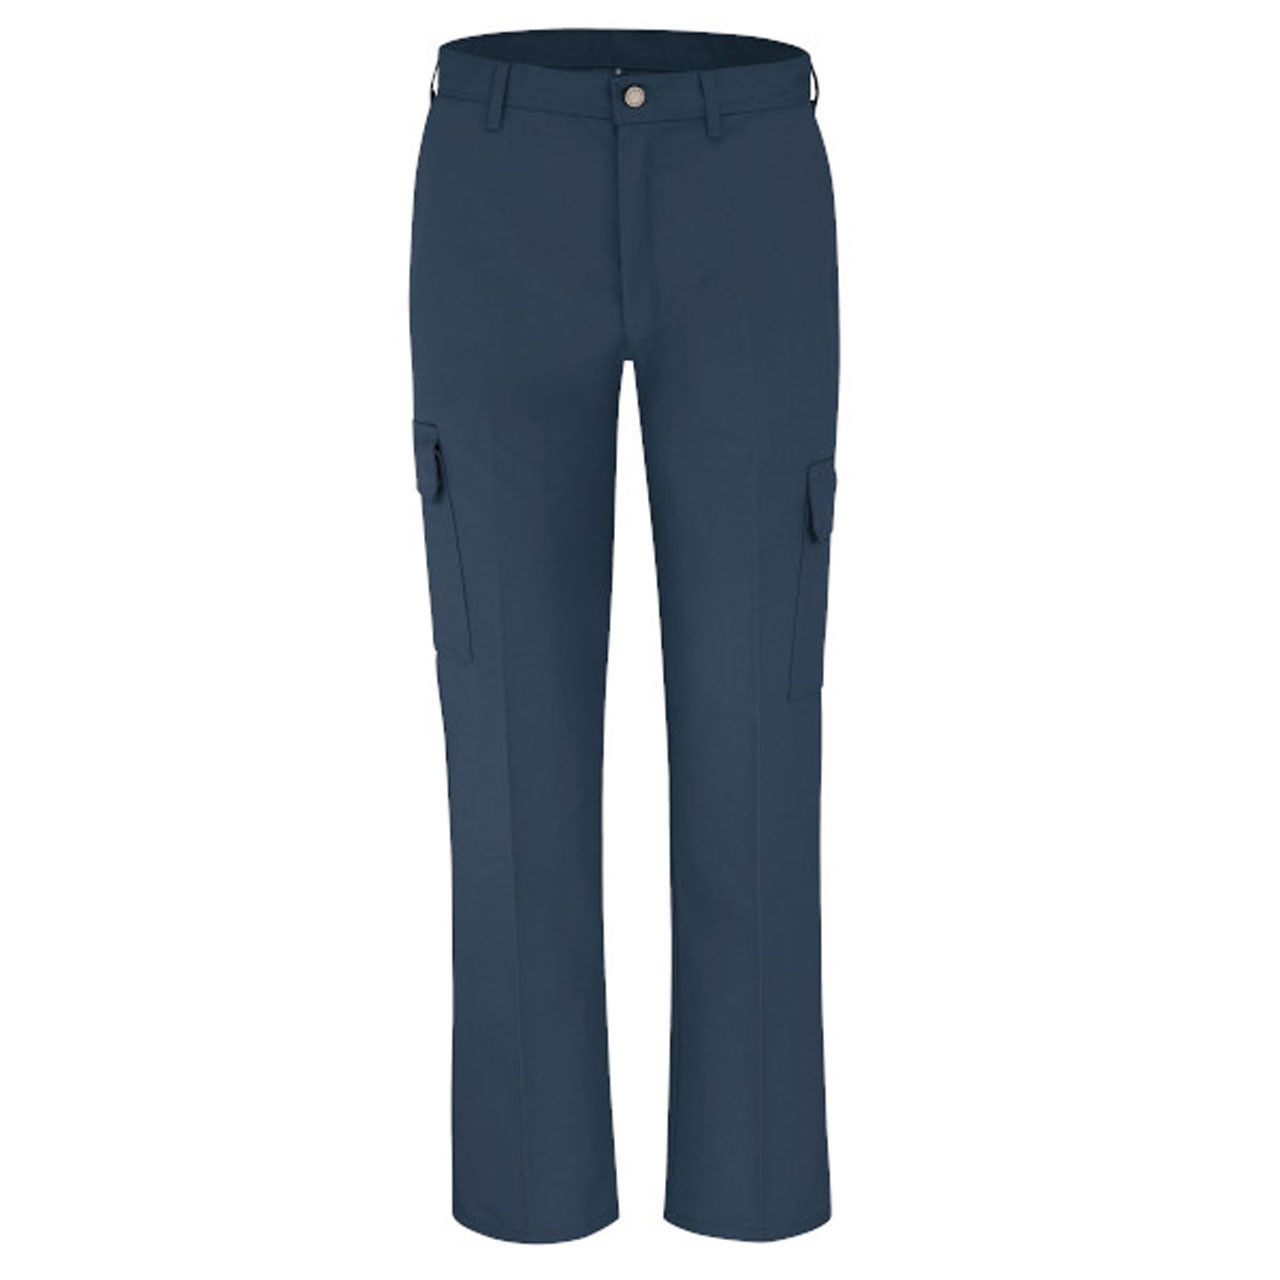 What's the blend composition of these blue Dickies pants?